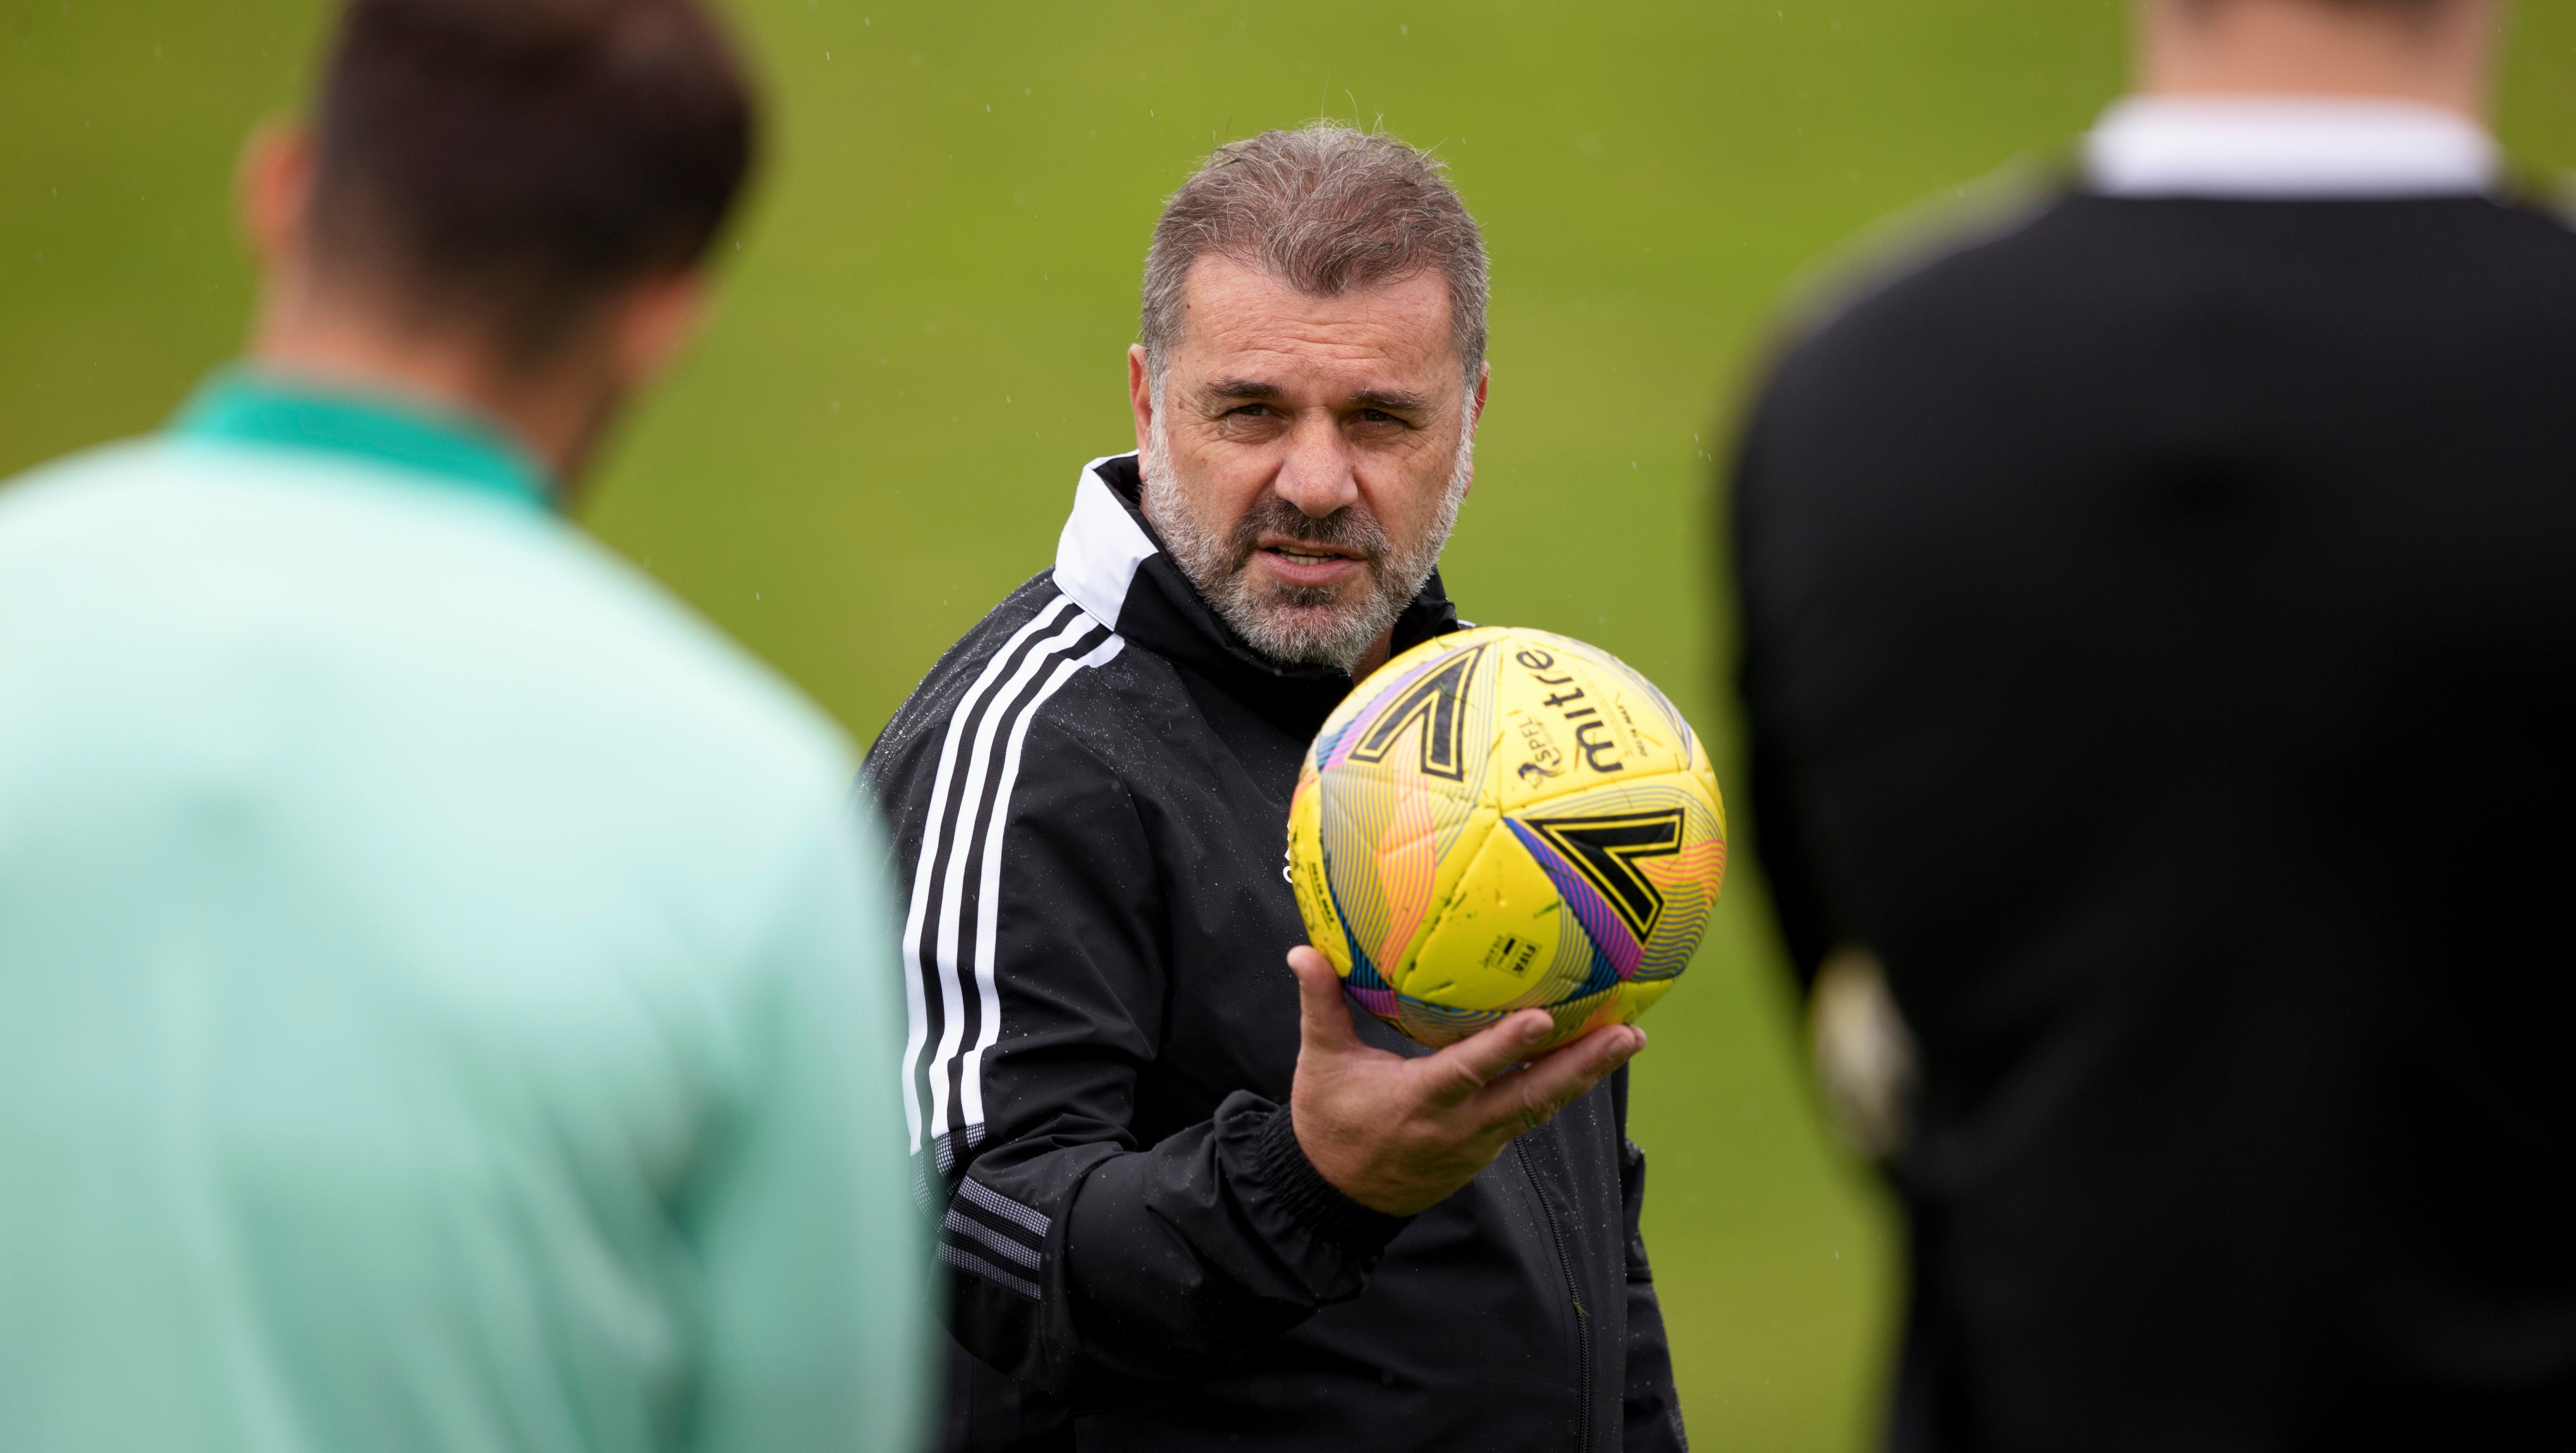 New Celtic manager Ange Postecoglou takes his first Celtic training session at Lennoxtown. (Photo by Craig Williamson / SNS Group)